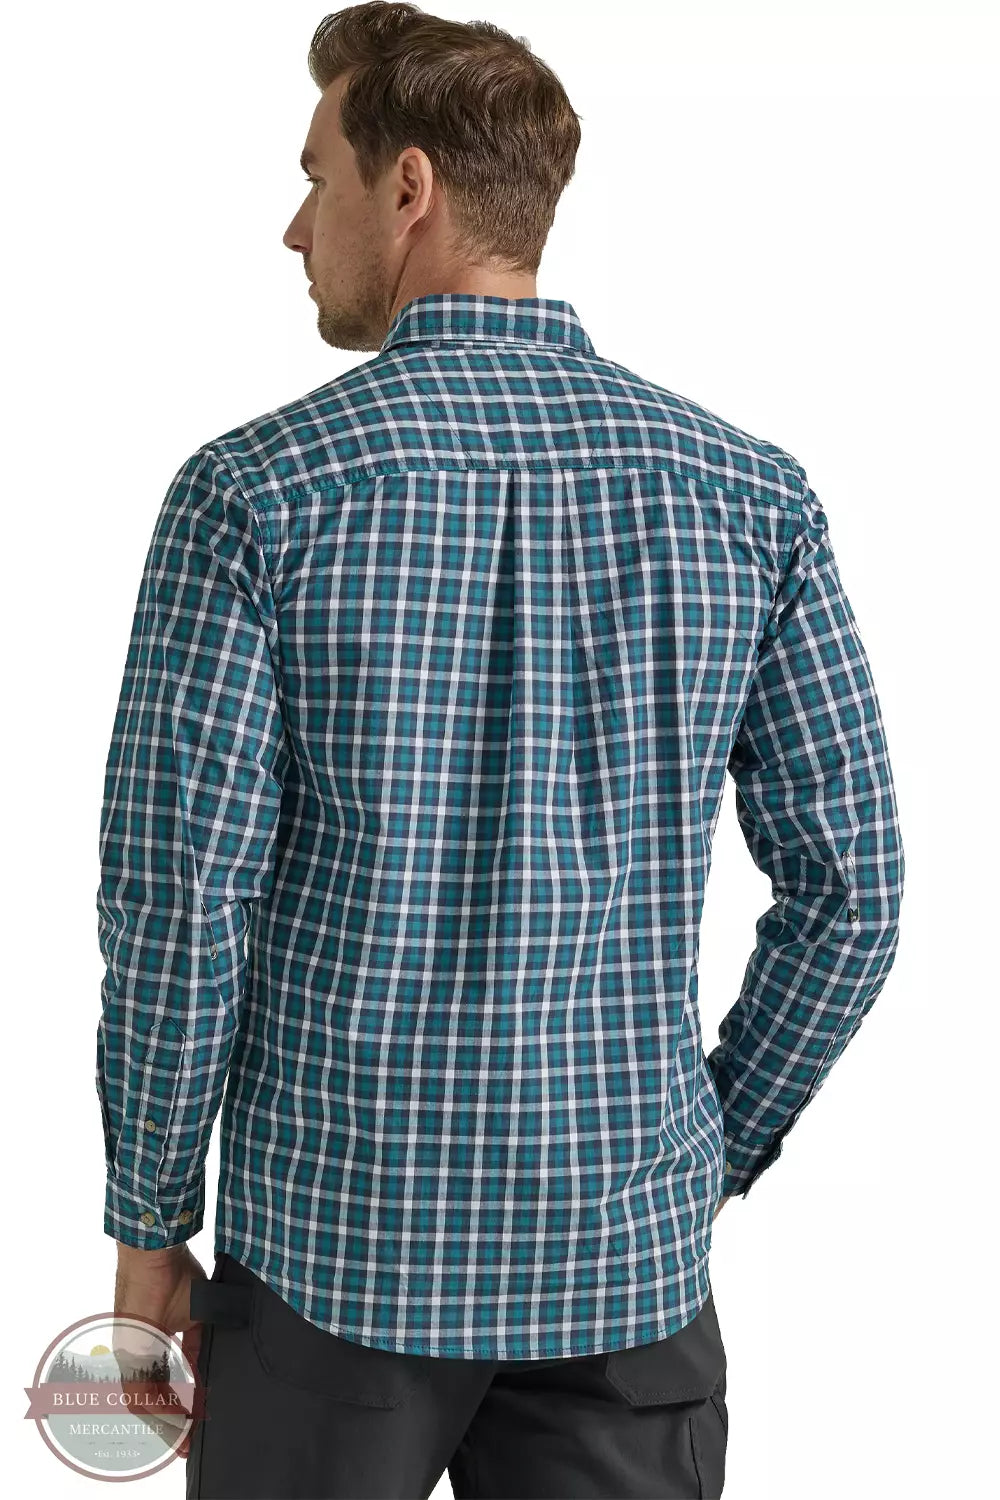 Wrangler 112330359 Rugged Wear Wrinkle Resist Button Down Shirt in Teal Navy Back View